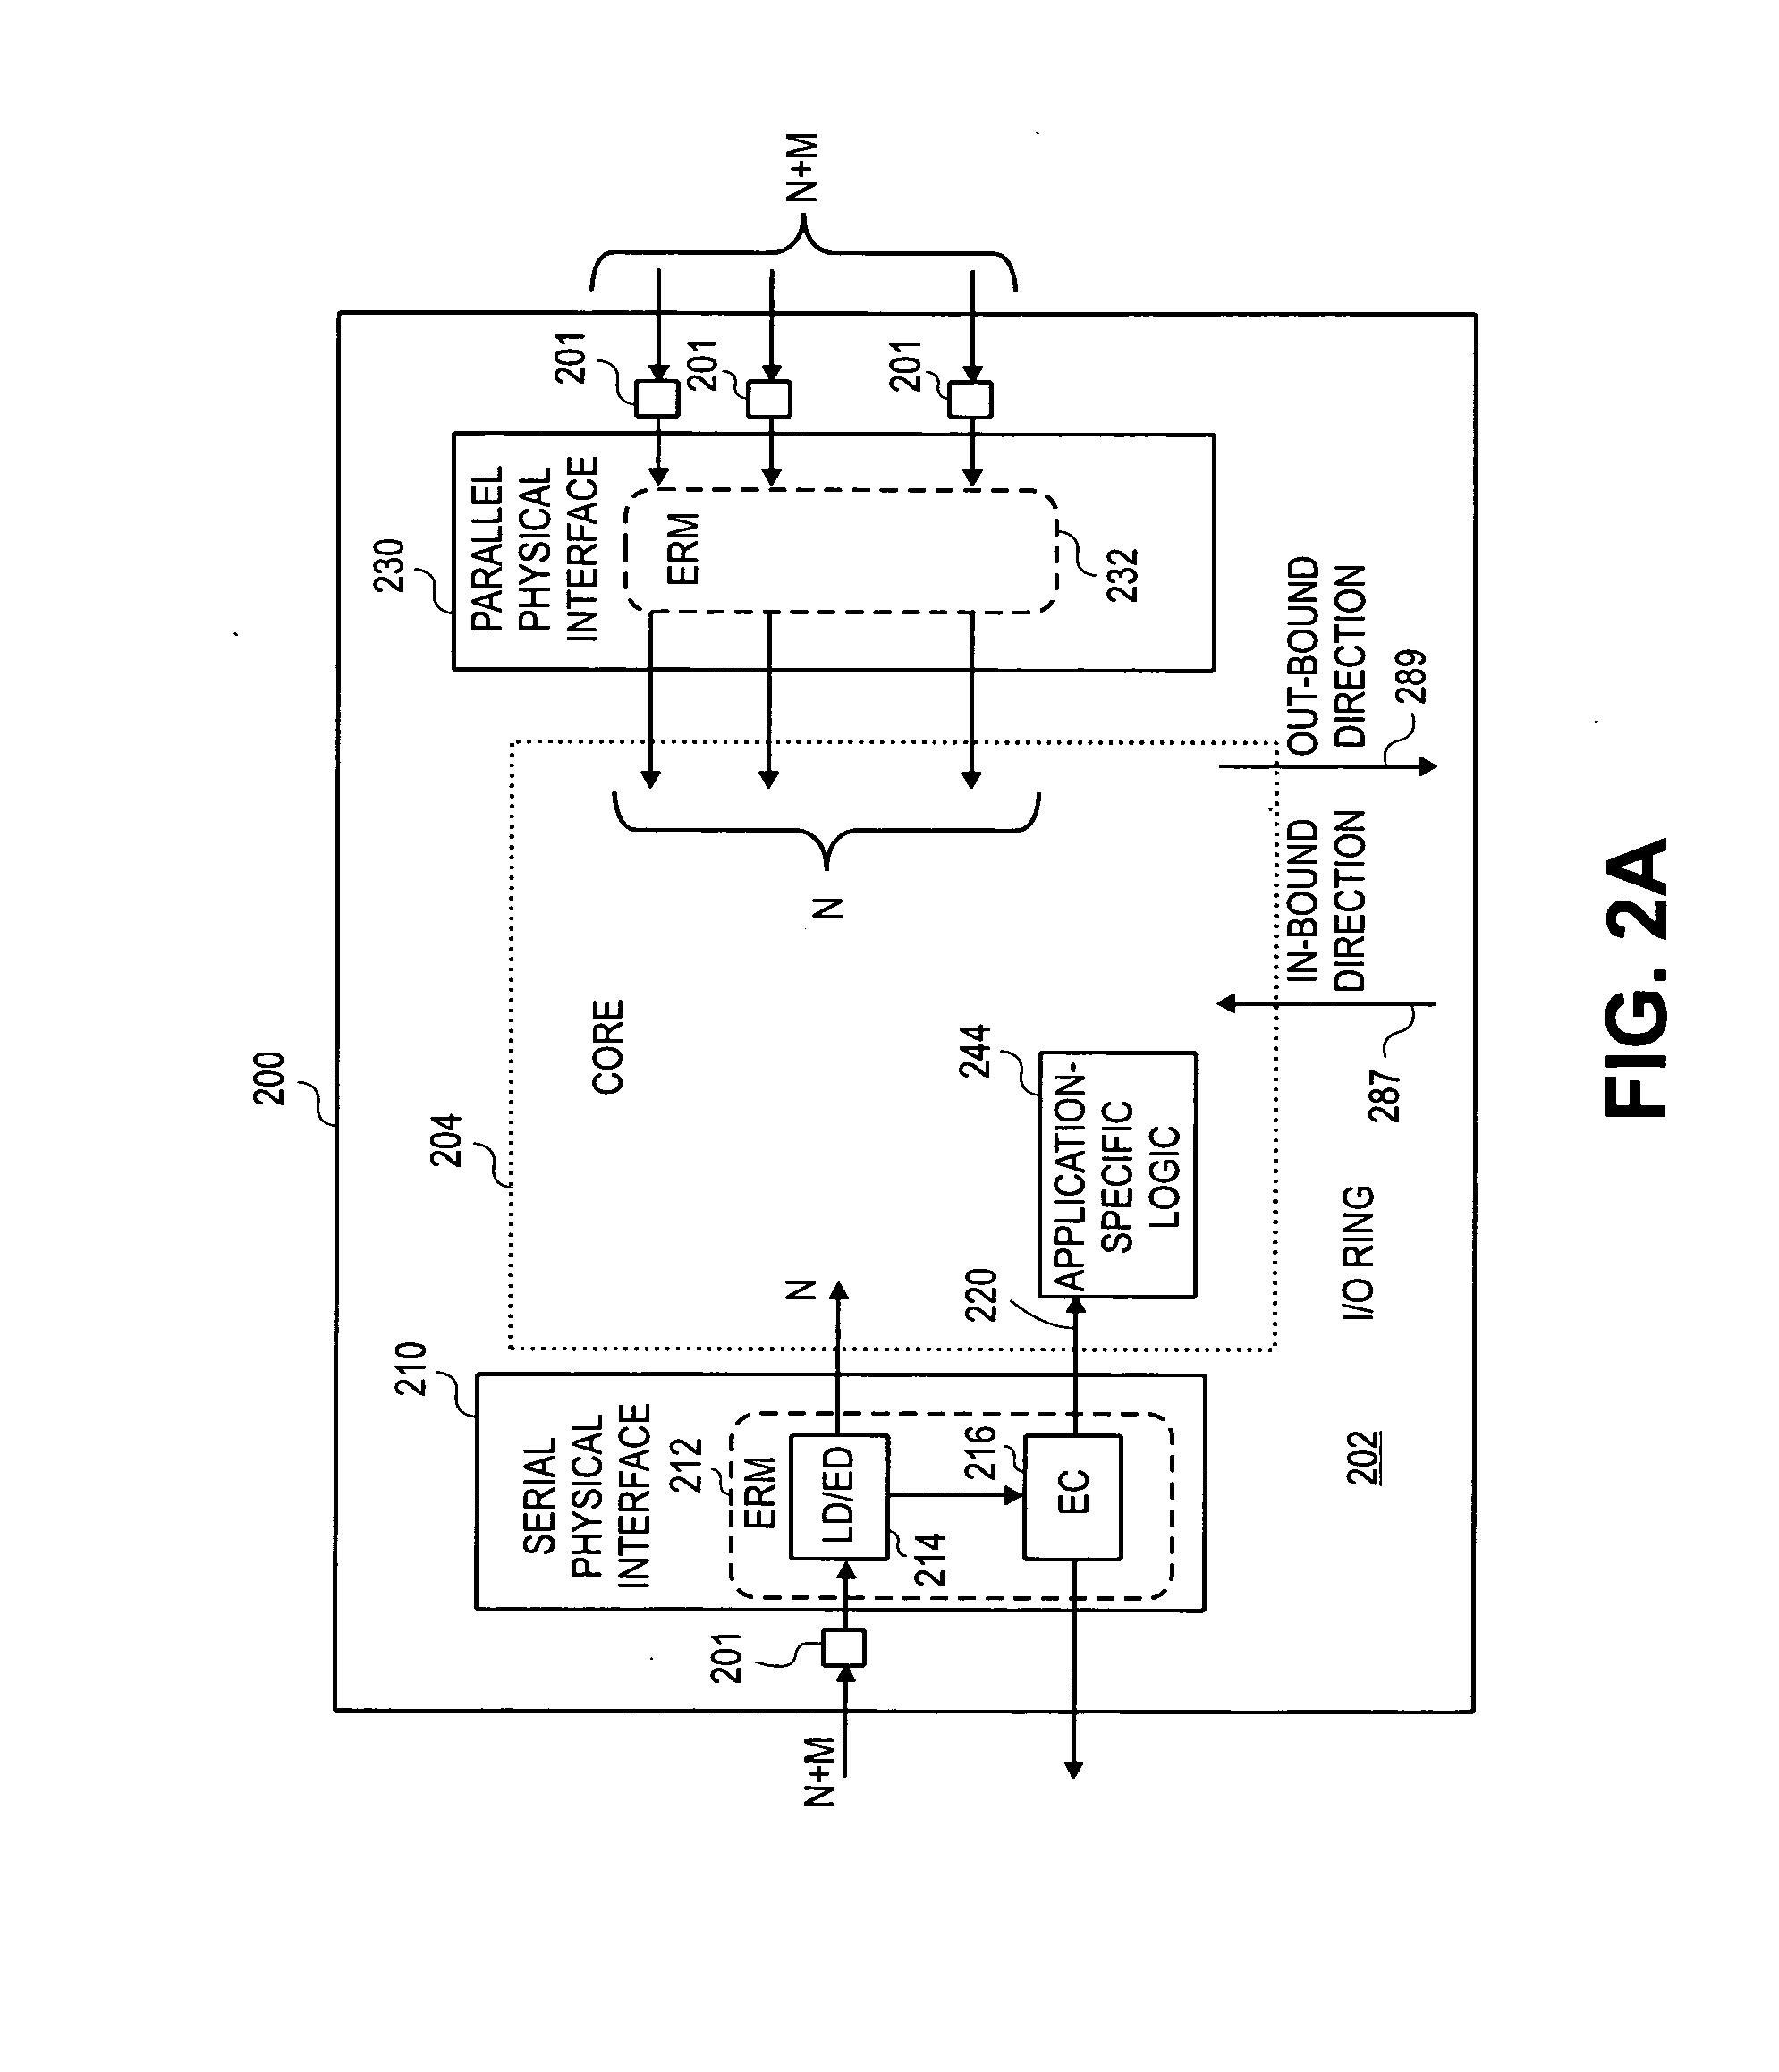 Error detection in physical interfaces for point-to-point communications between integrated circuits